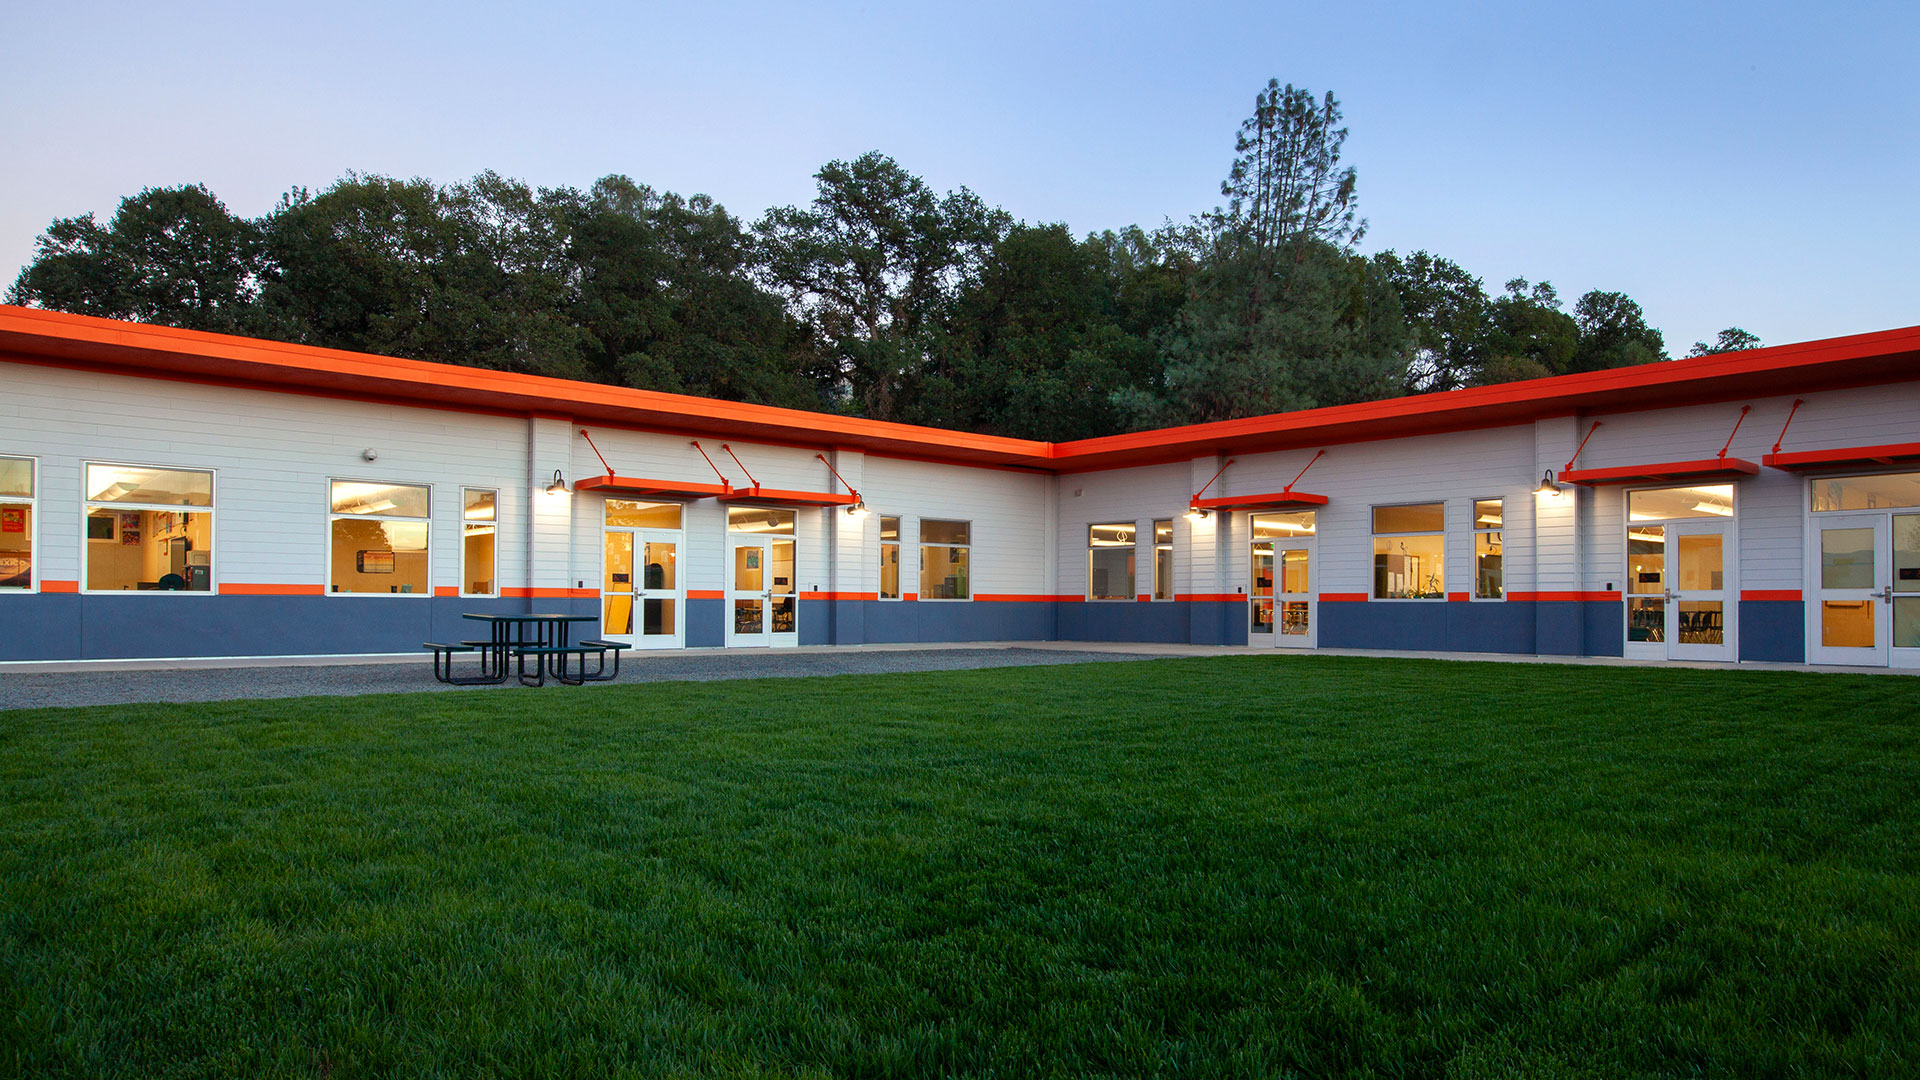 Classroom wing with white walls, gray wainscot, and orange trim in front of grass field.